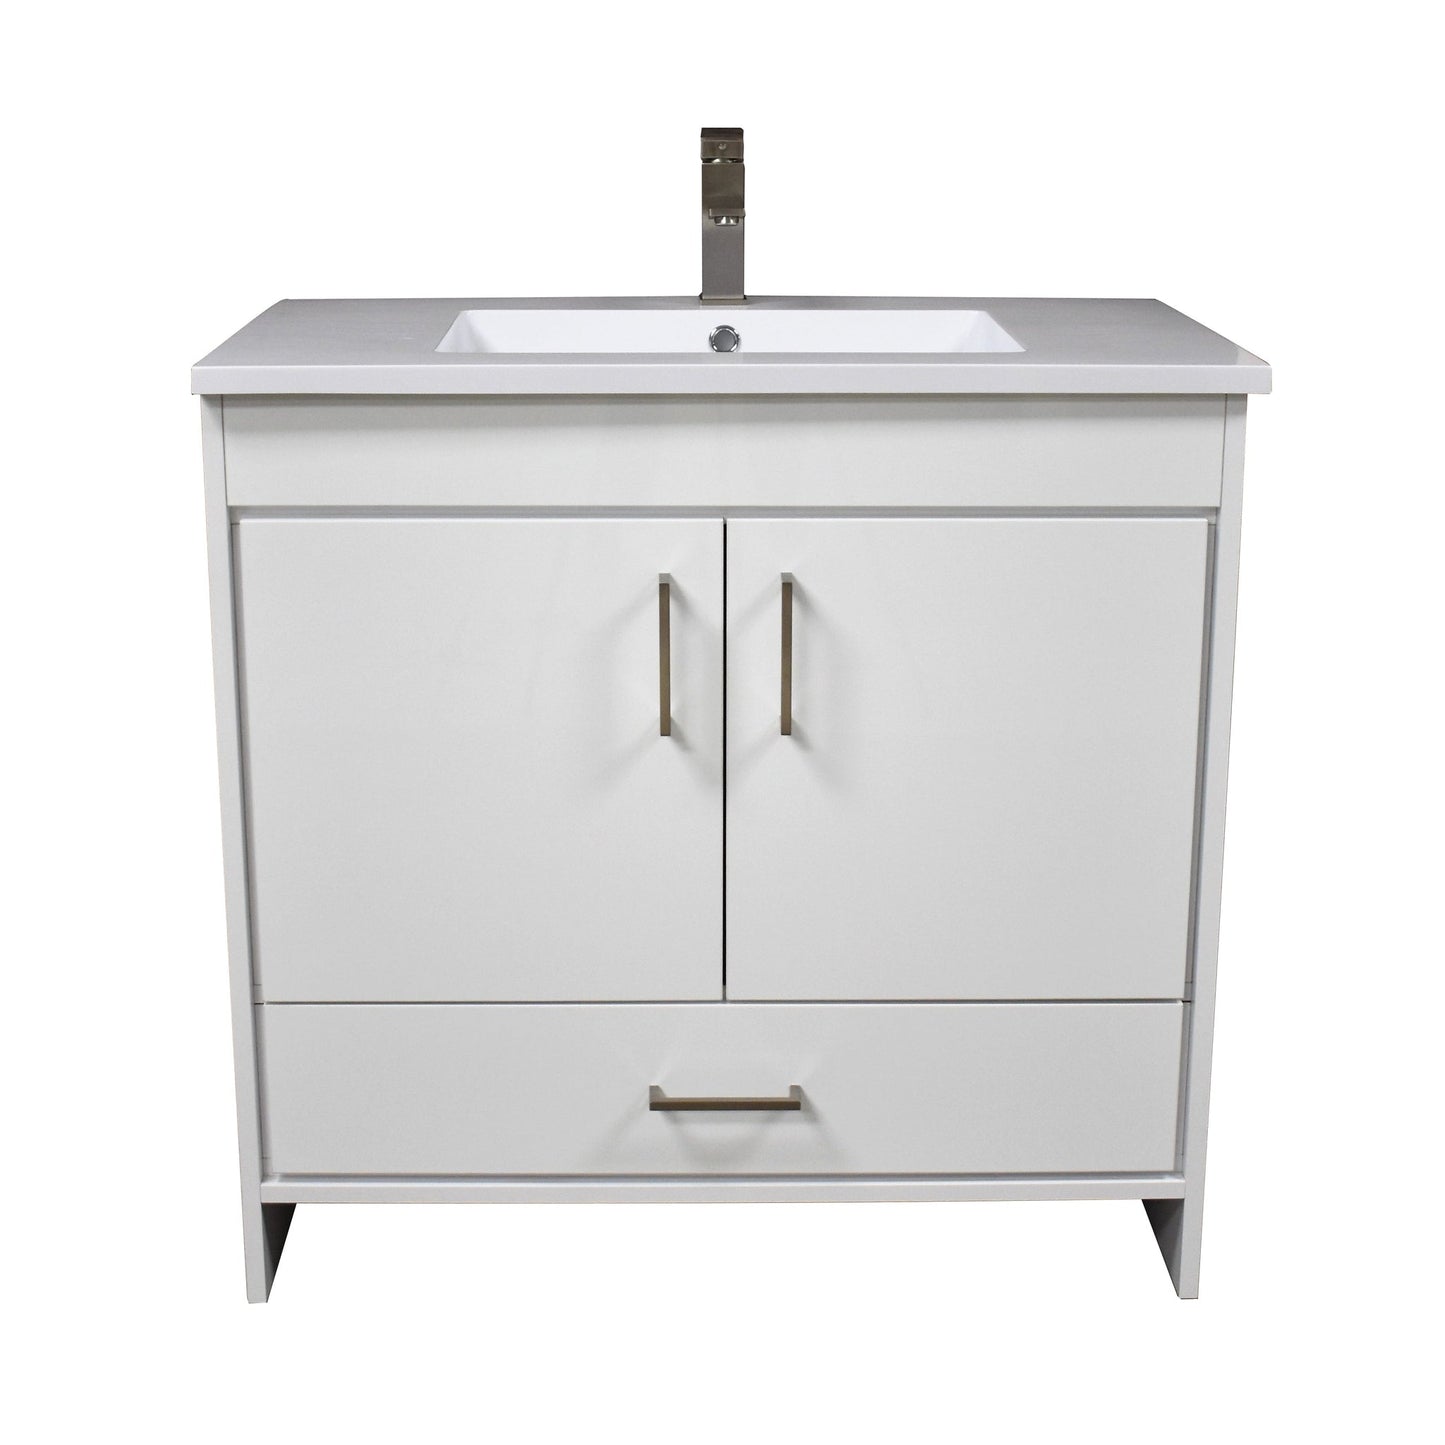 Volpa USA Rio 36" White Freestanding Modern Bathroom Vanity With Integrated Acrylic Top and Brushed Nickel Handles